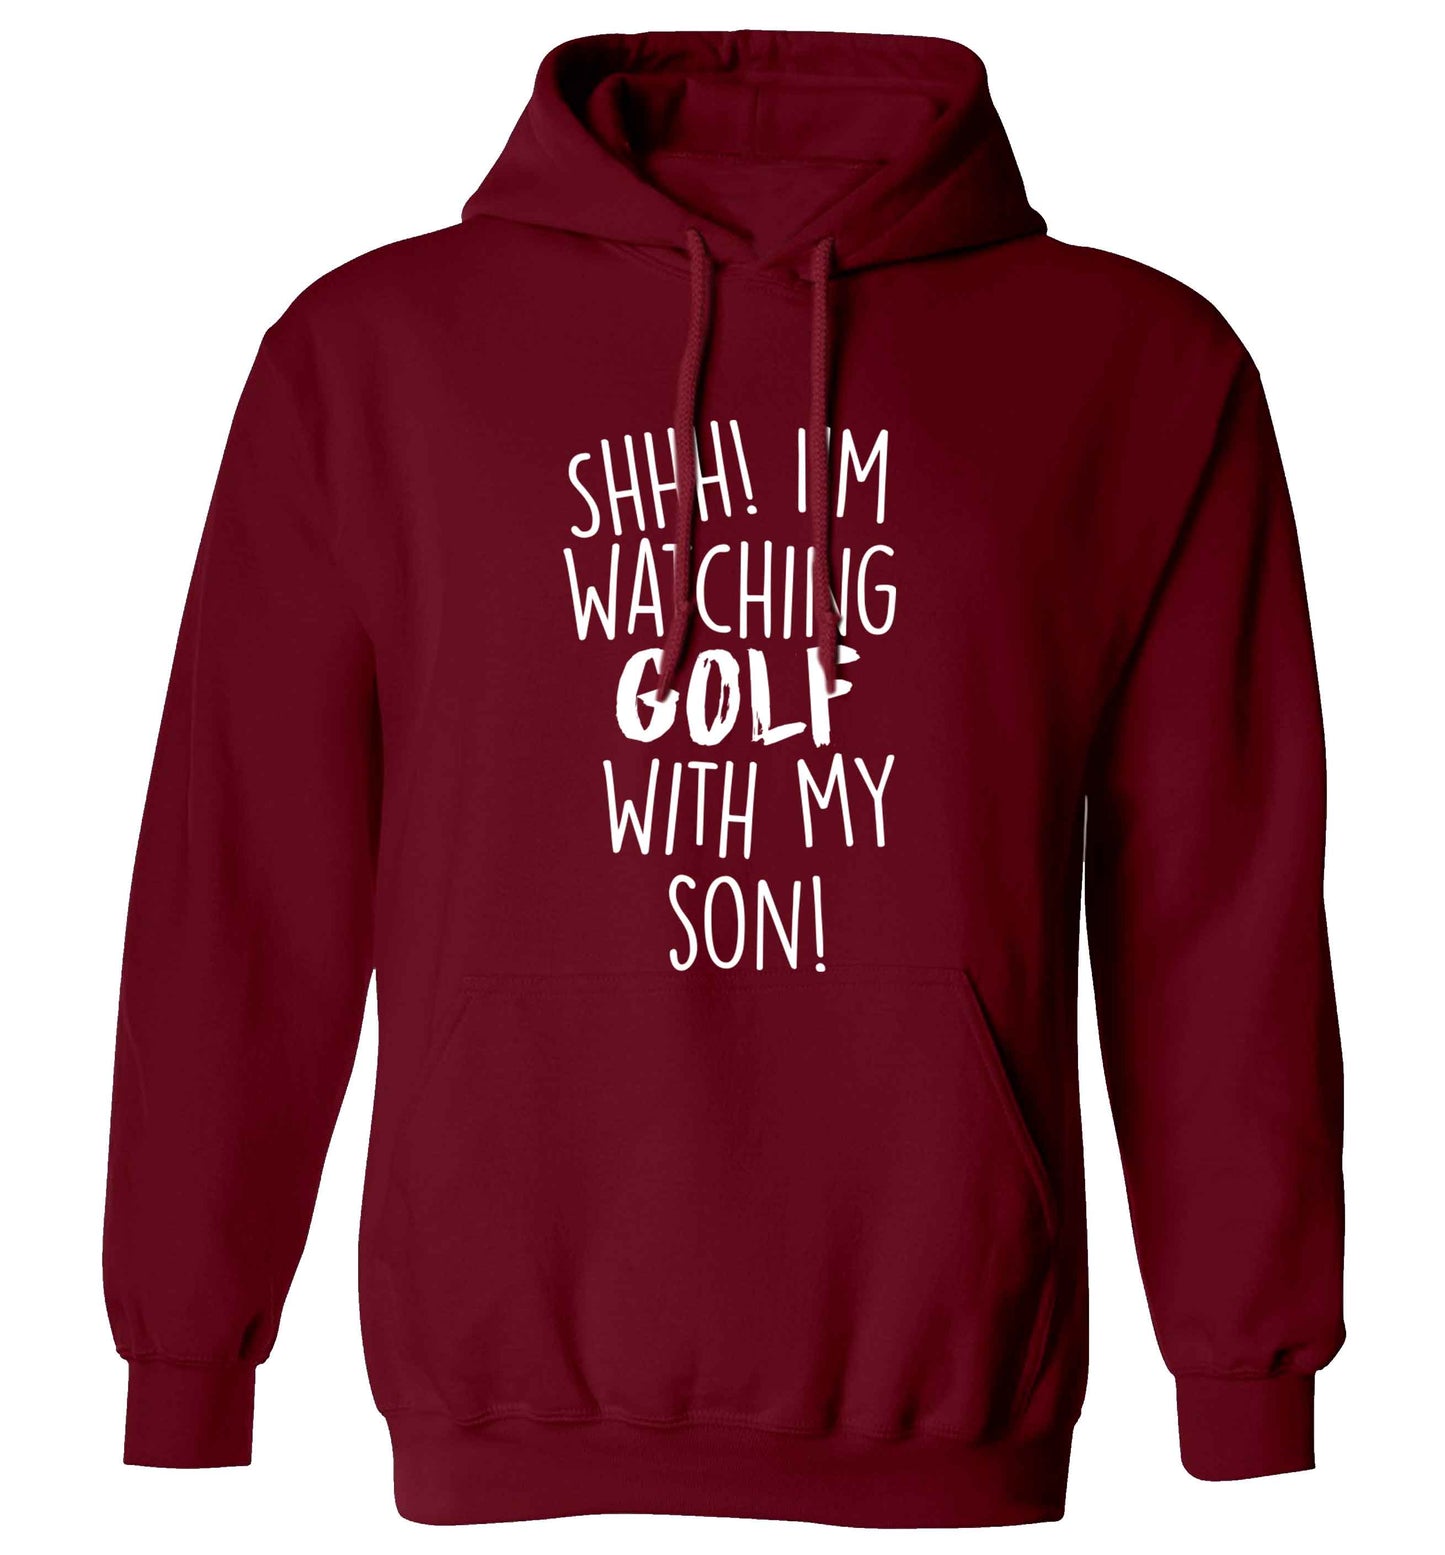 Shh I'm watching golf with my son adults unisex maroon hoodie 2XL